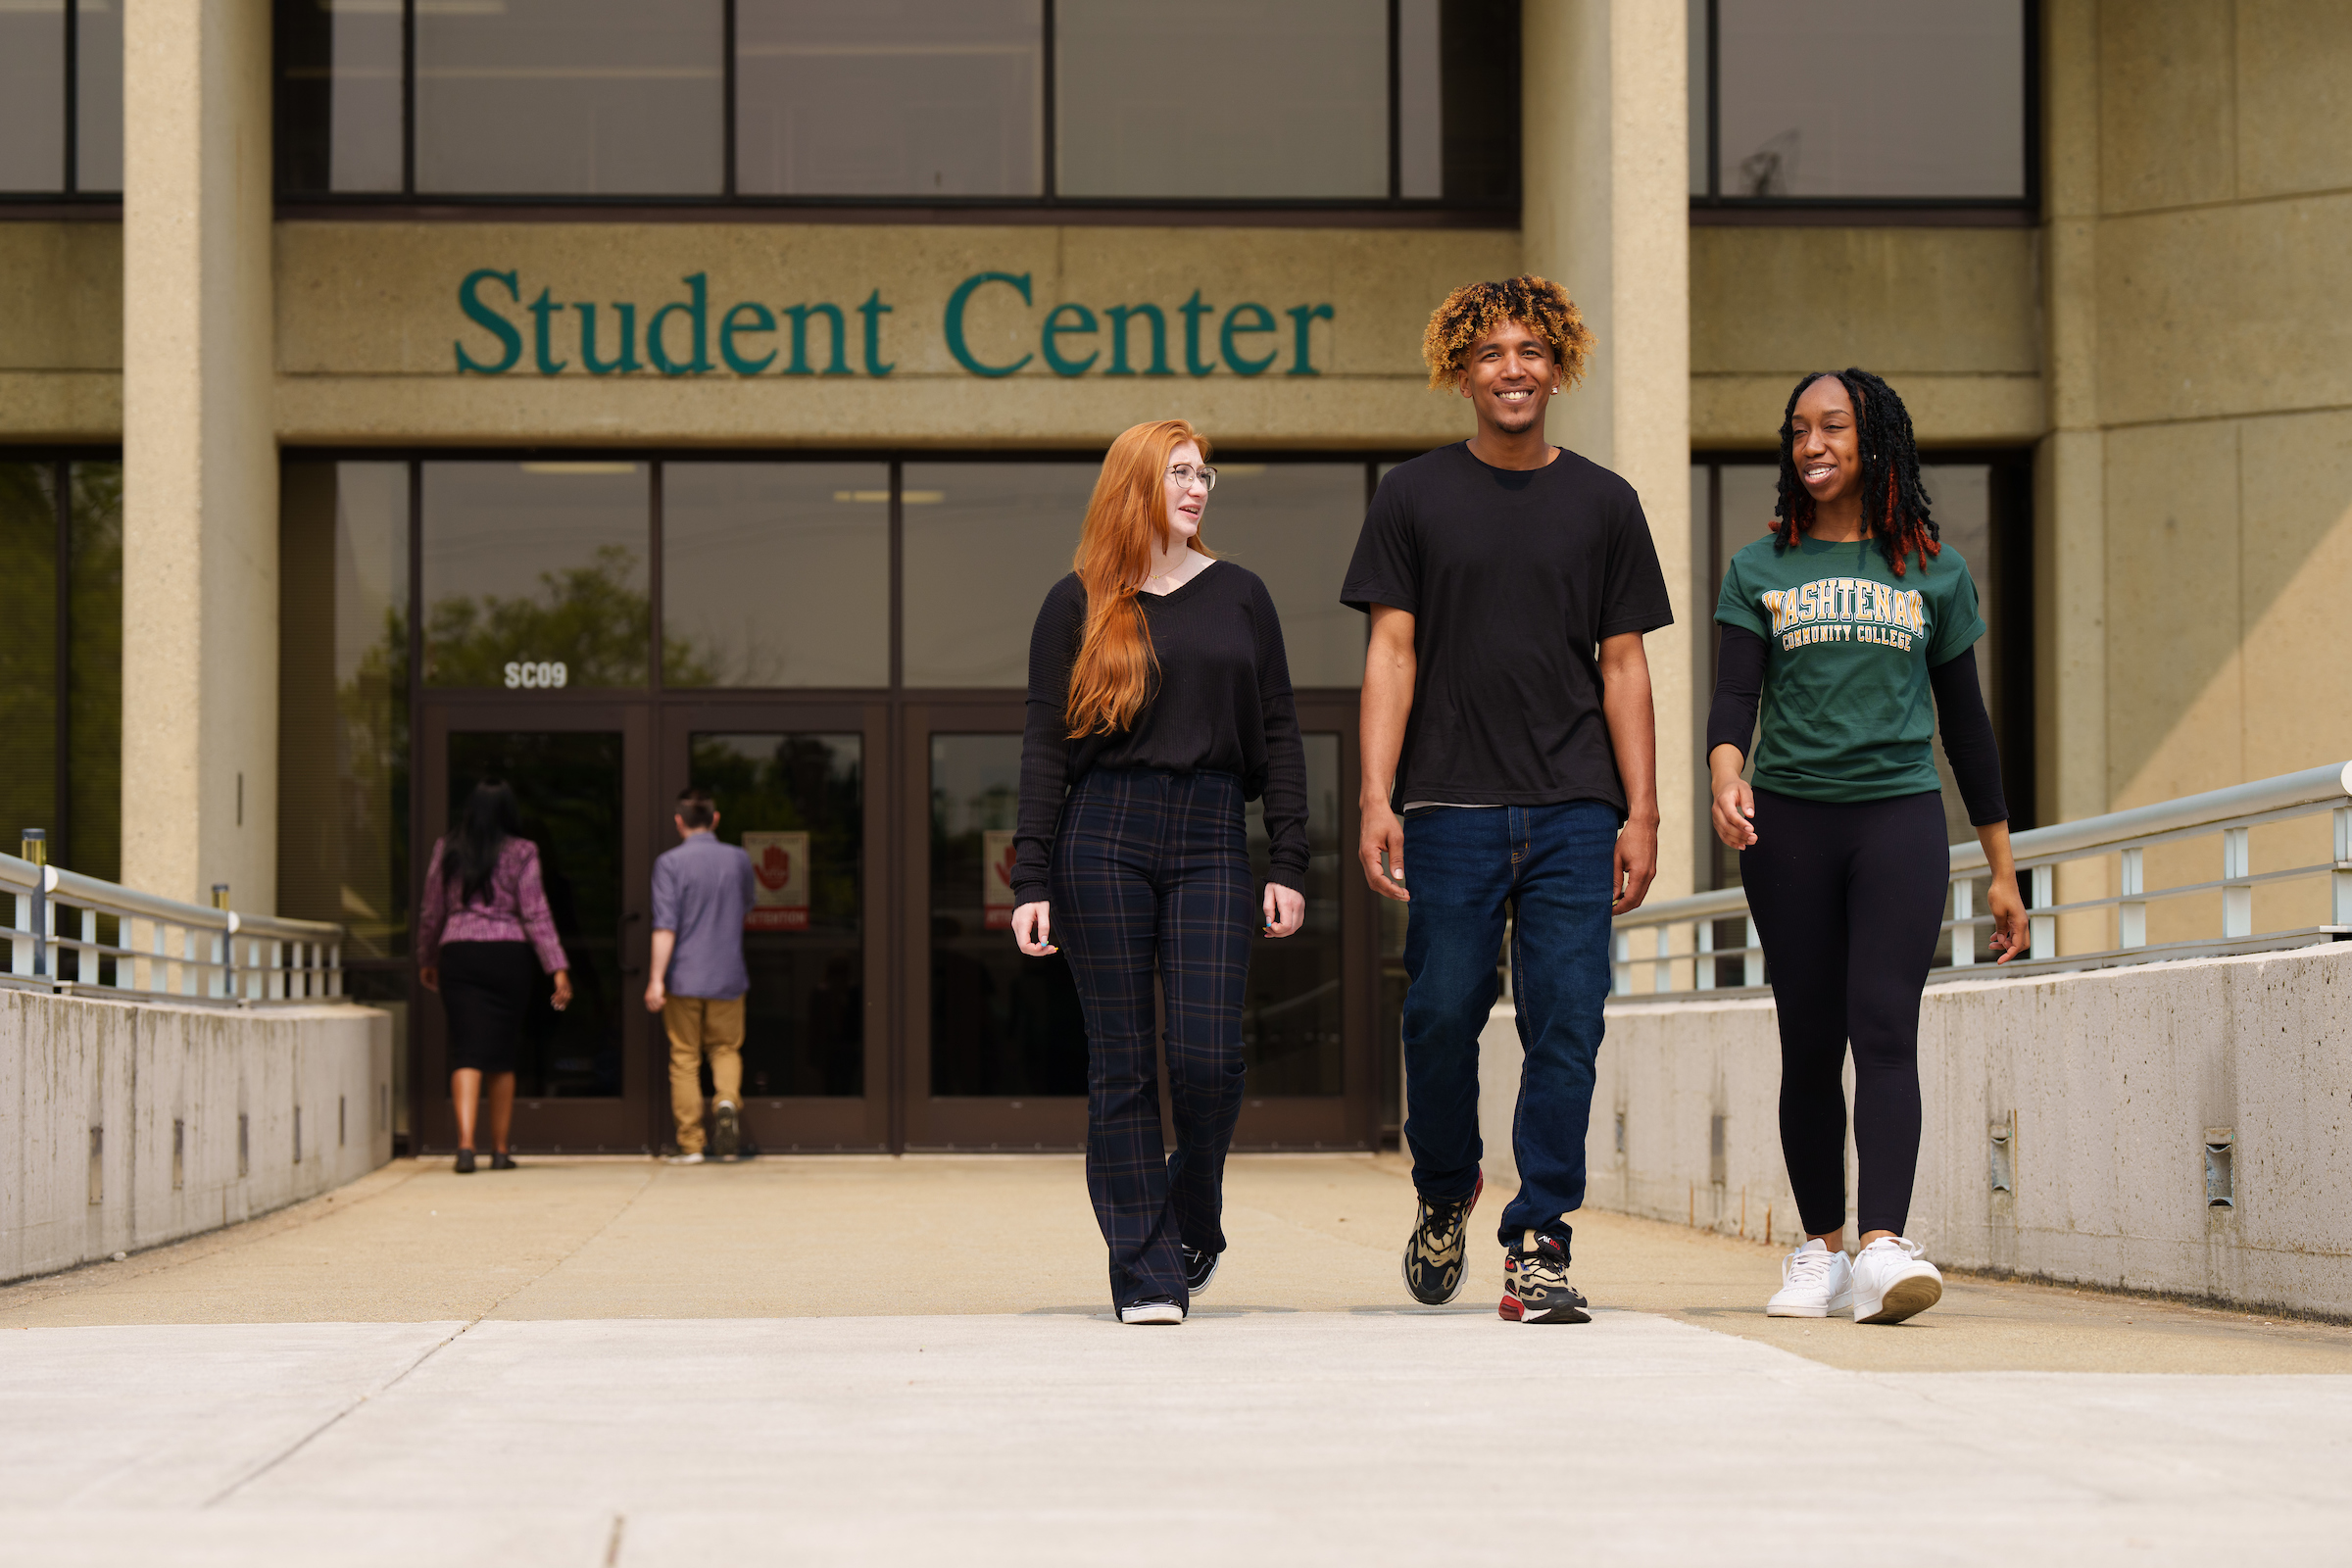 Students walking in front of Student Center